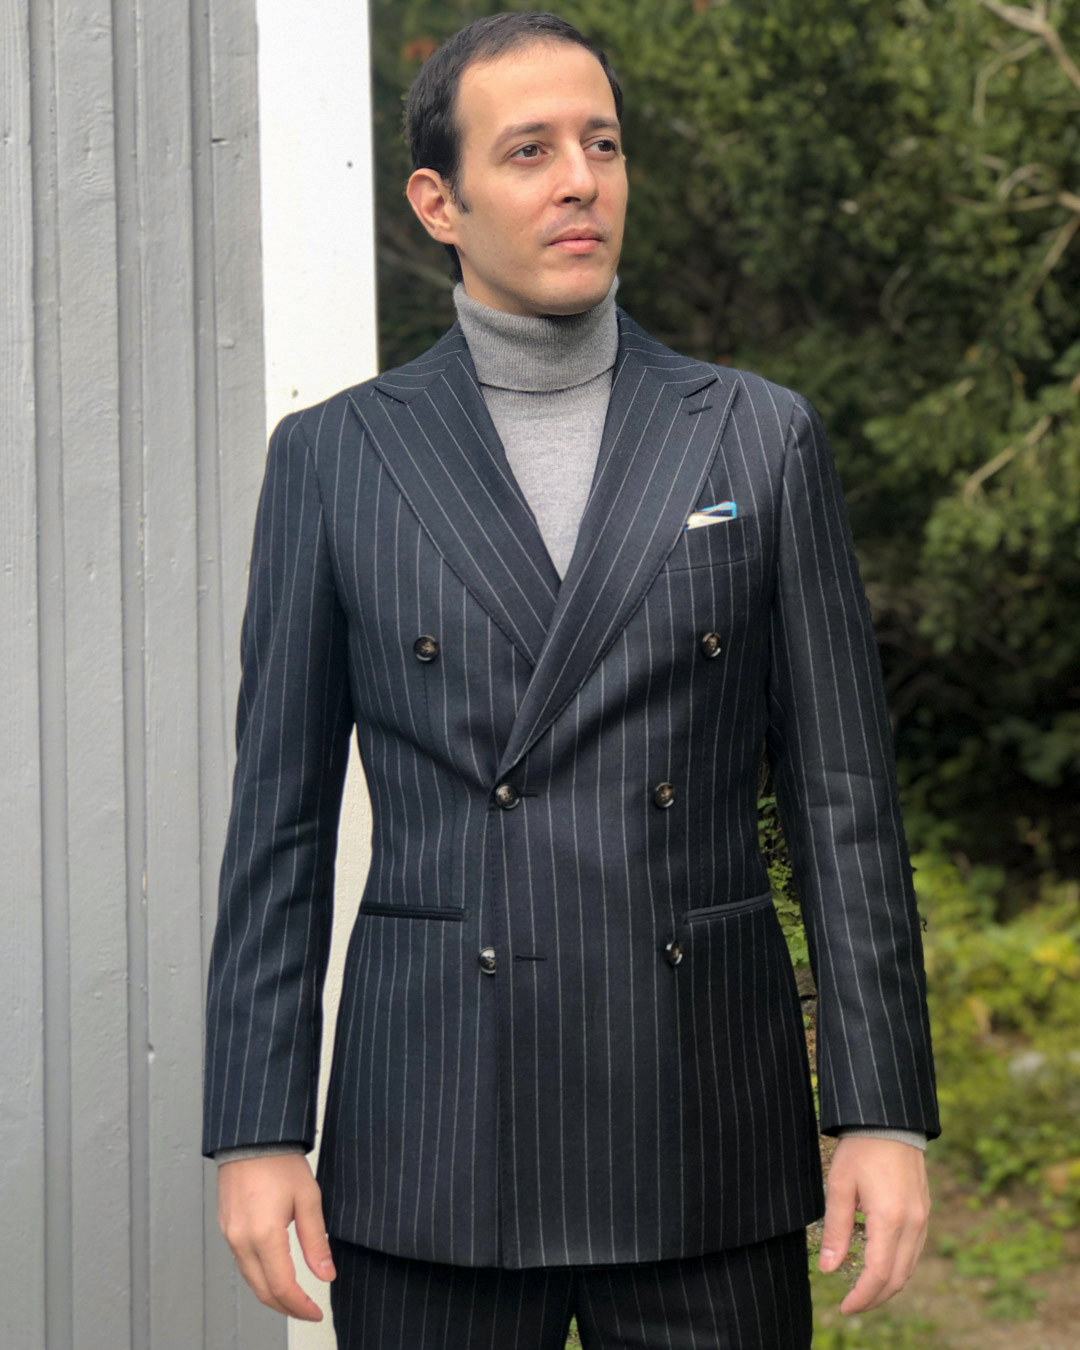 wearing charcoal grey pinstripe suit with a grey turtleneck